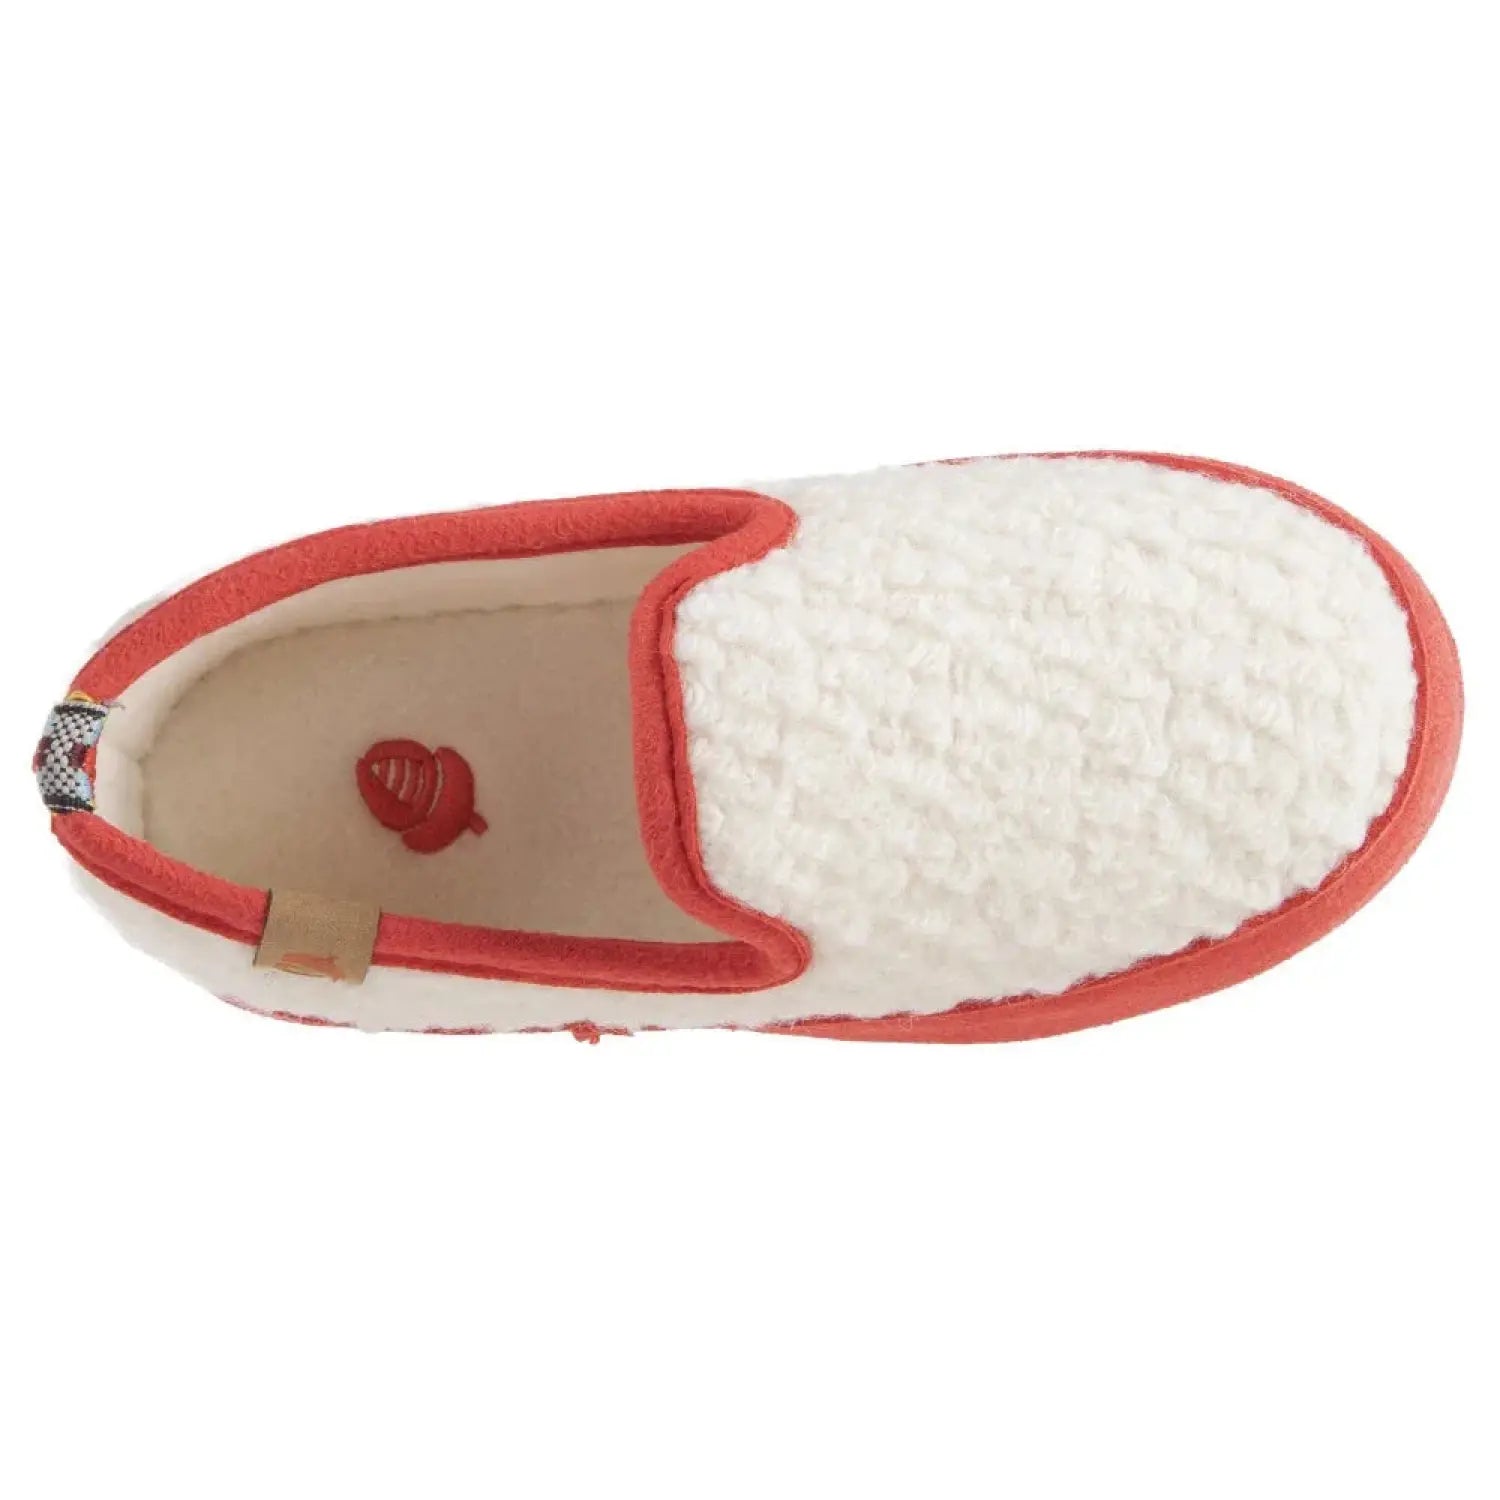 White Sherpa Slipper with red outsole and trim top view